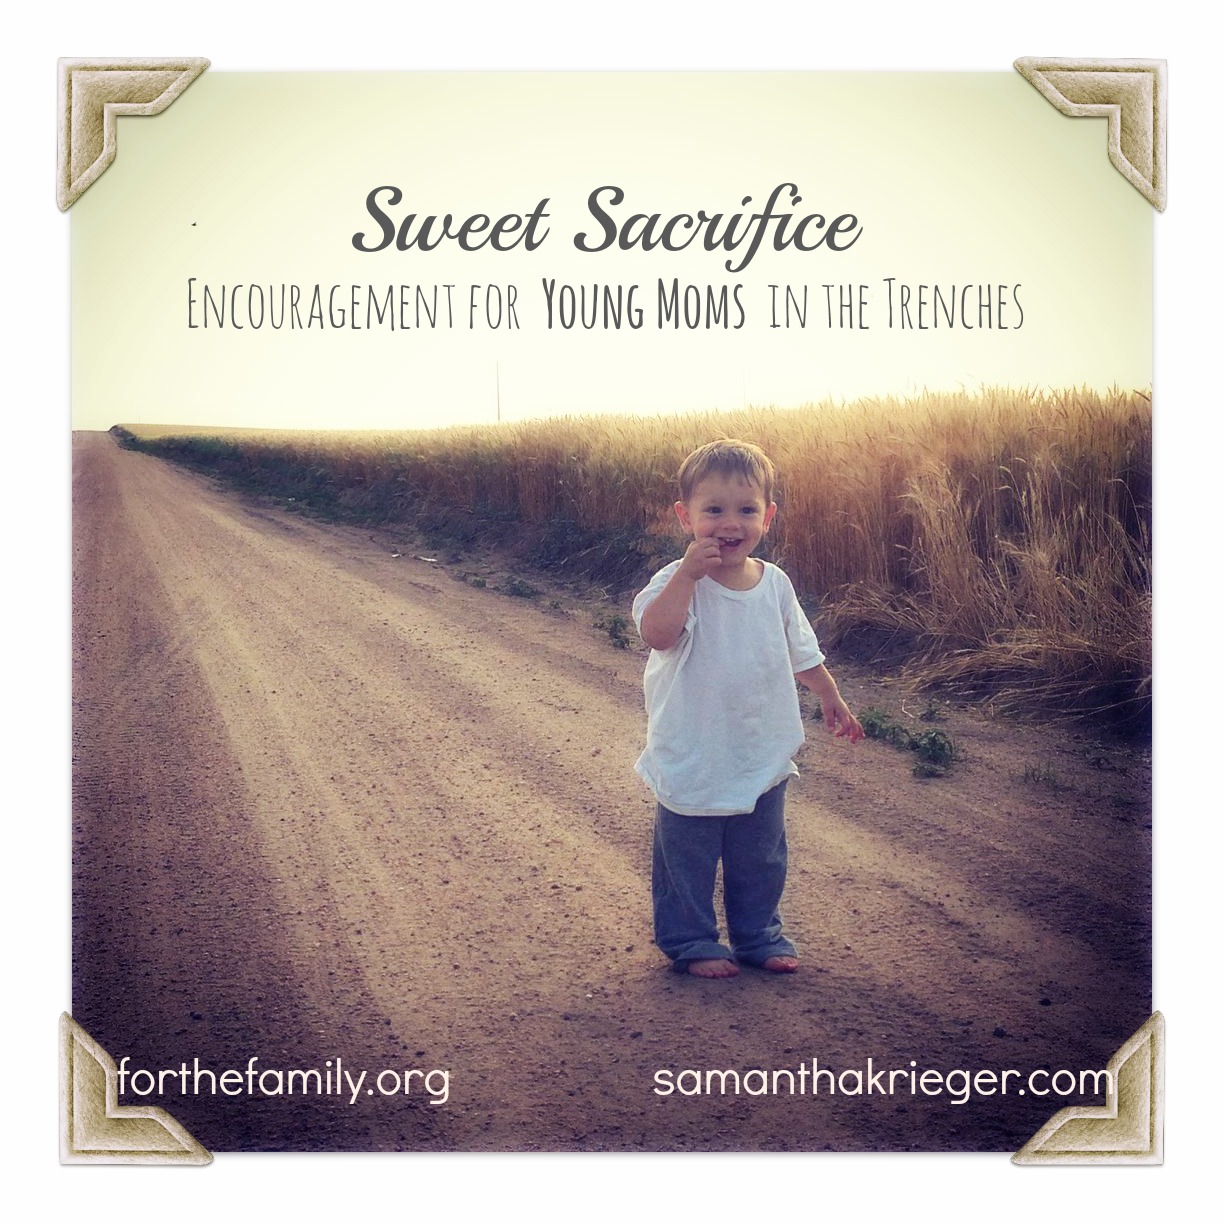 Sweet Sacrifice: Encouragement for Young Moms in the Trenches